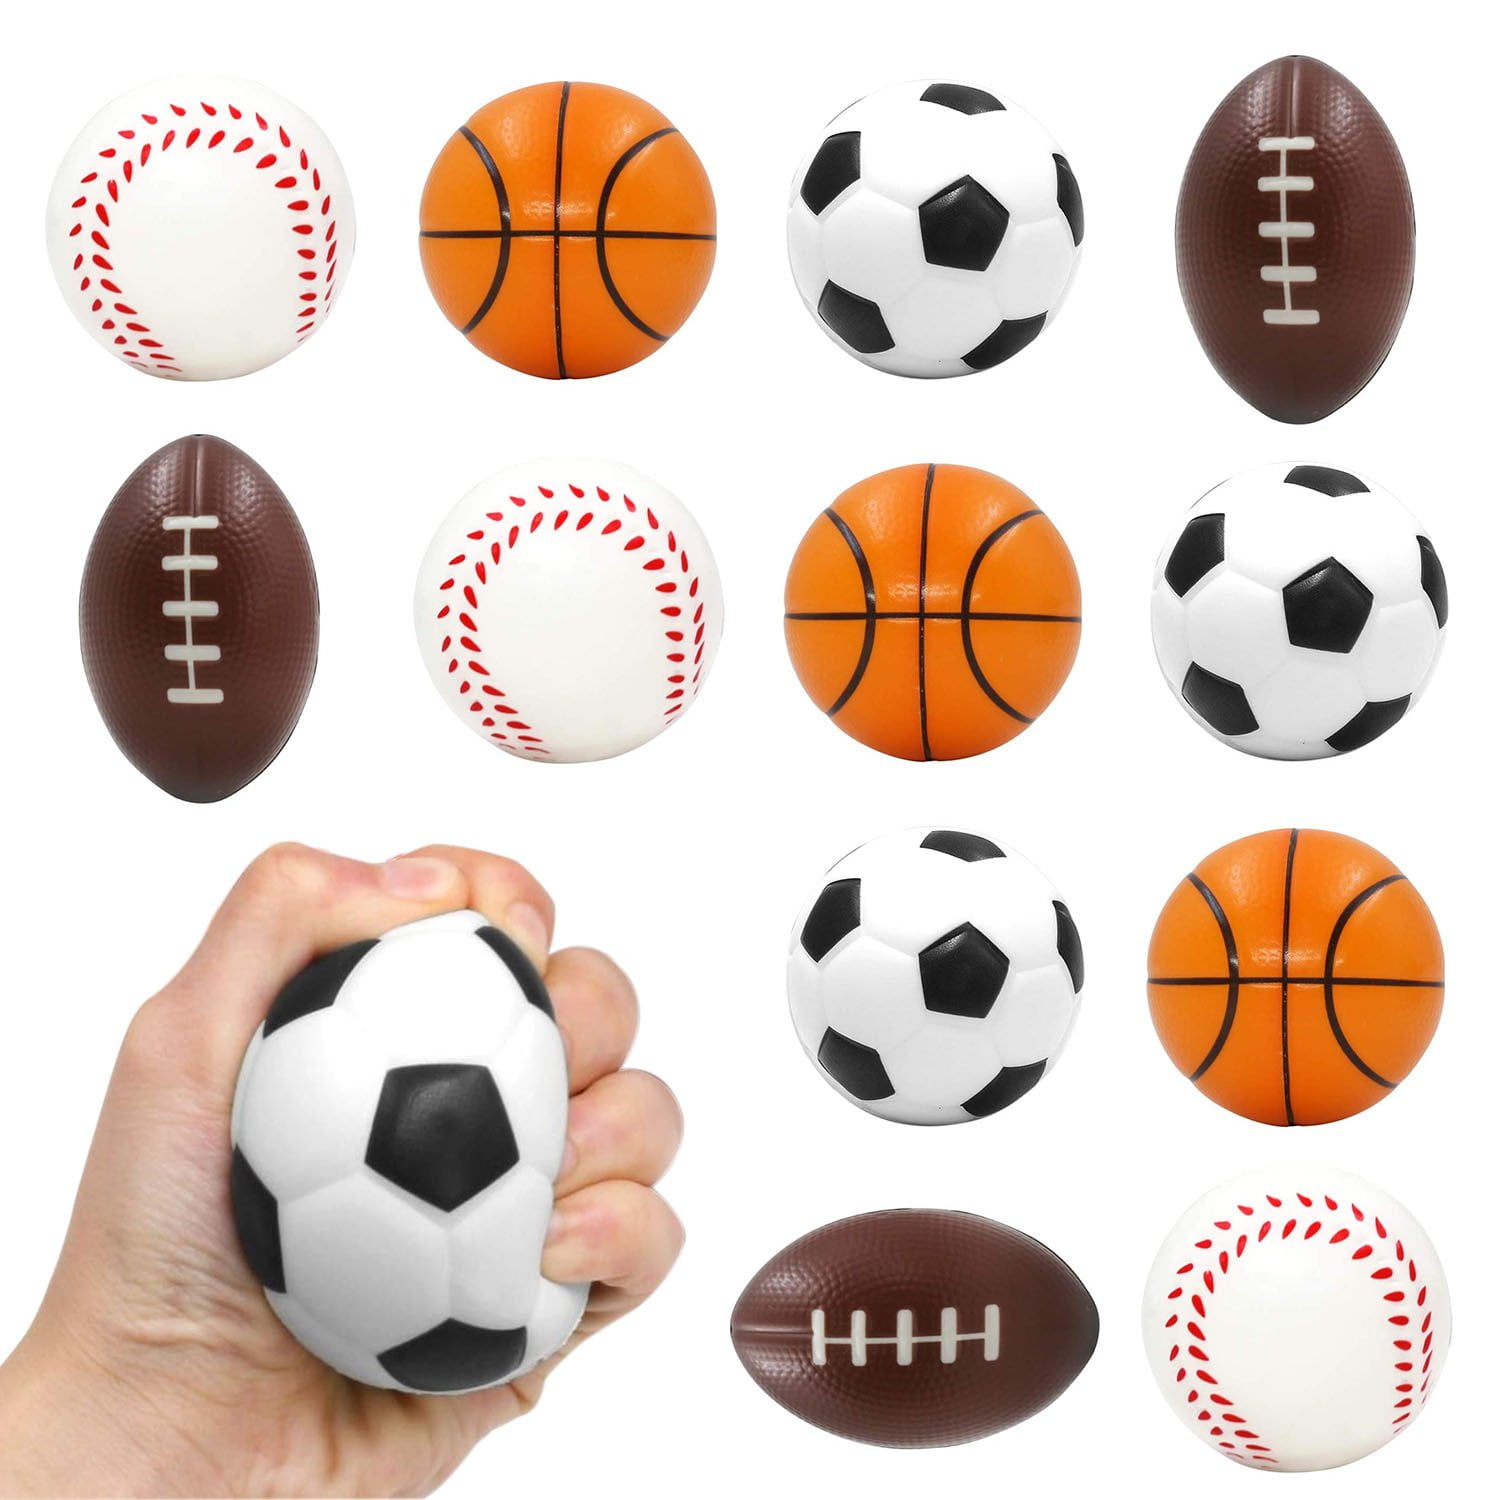 Kids Play Toy SPORTS 3 Pack BALLS Football Basketball Soccer Ball 2 Sets Avail 